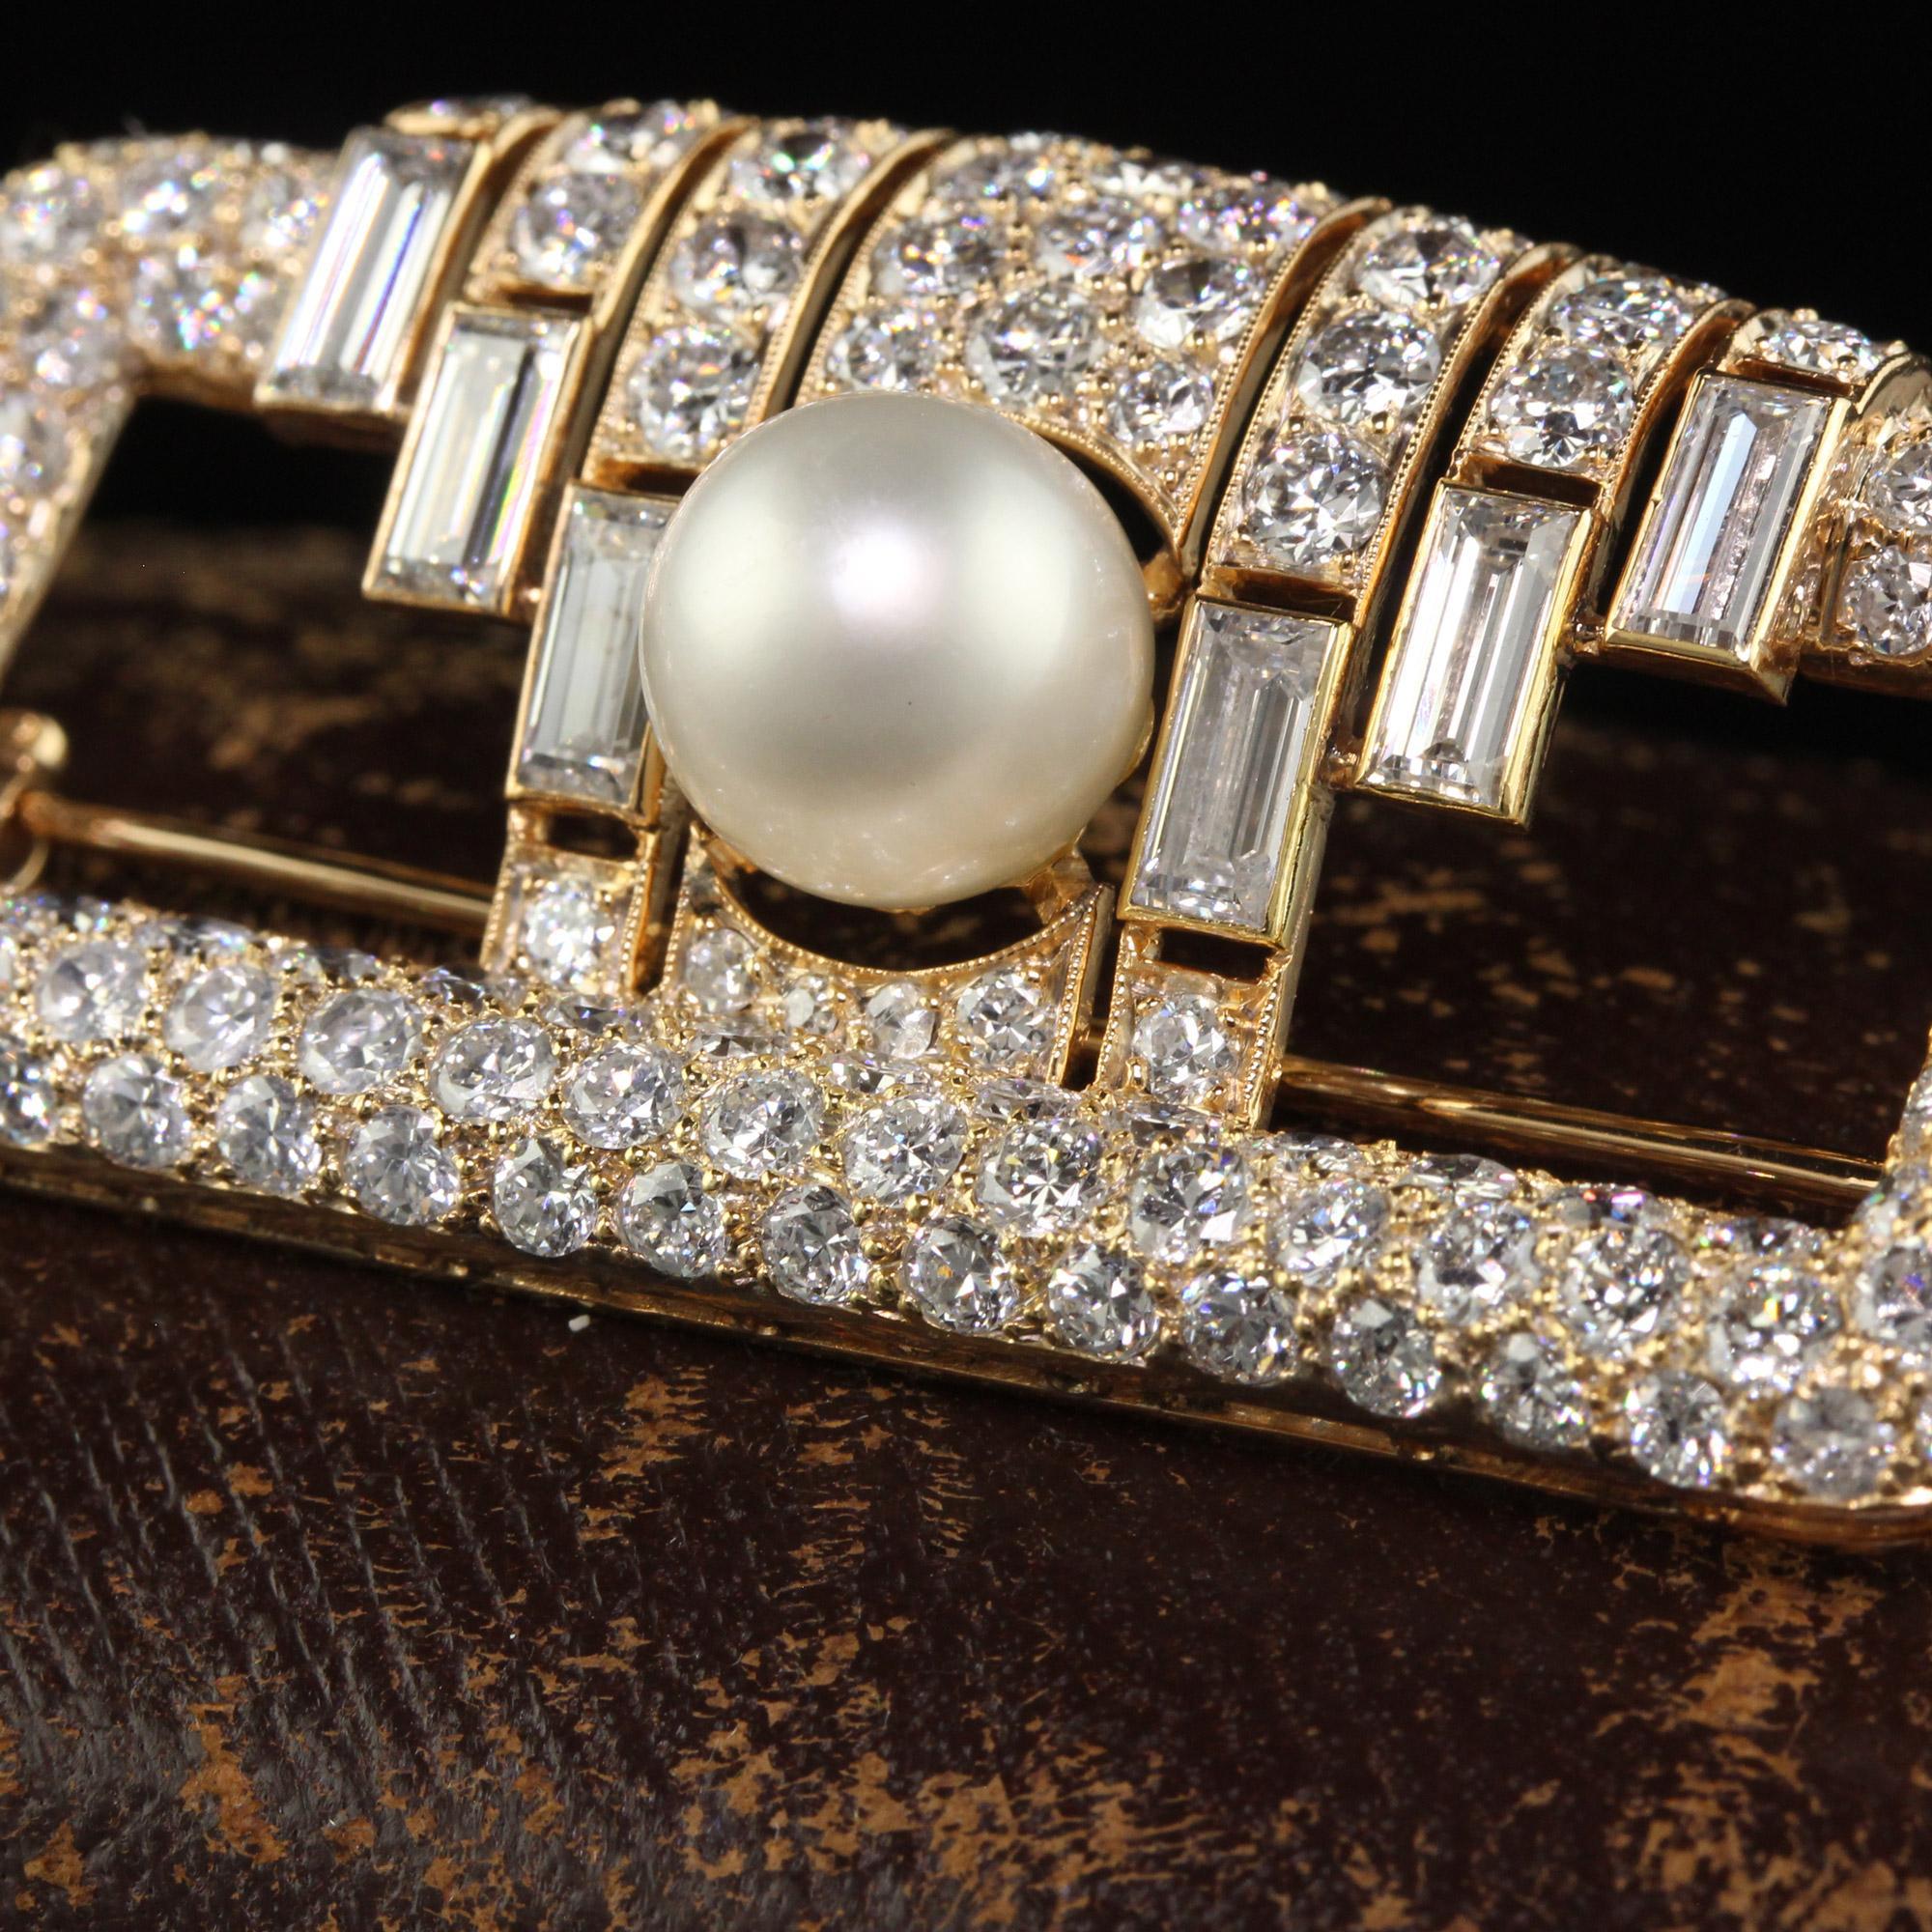 Vintage Retro Cartier 18K Yellow Gold Diamond Natural Pearl Brooch Pin - GIA In Good Condition For Sale In Great Neck, NY